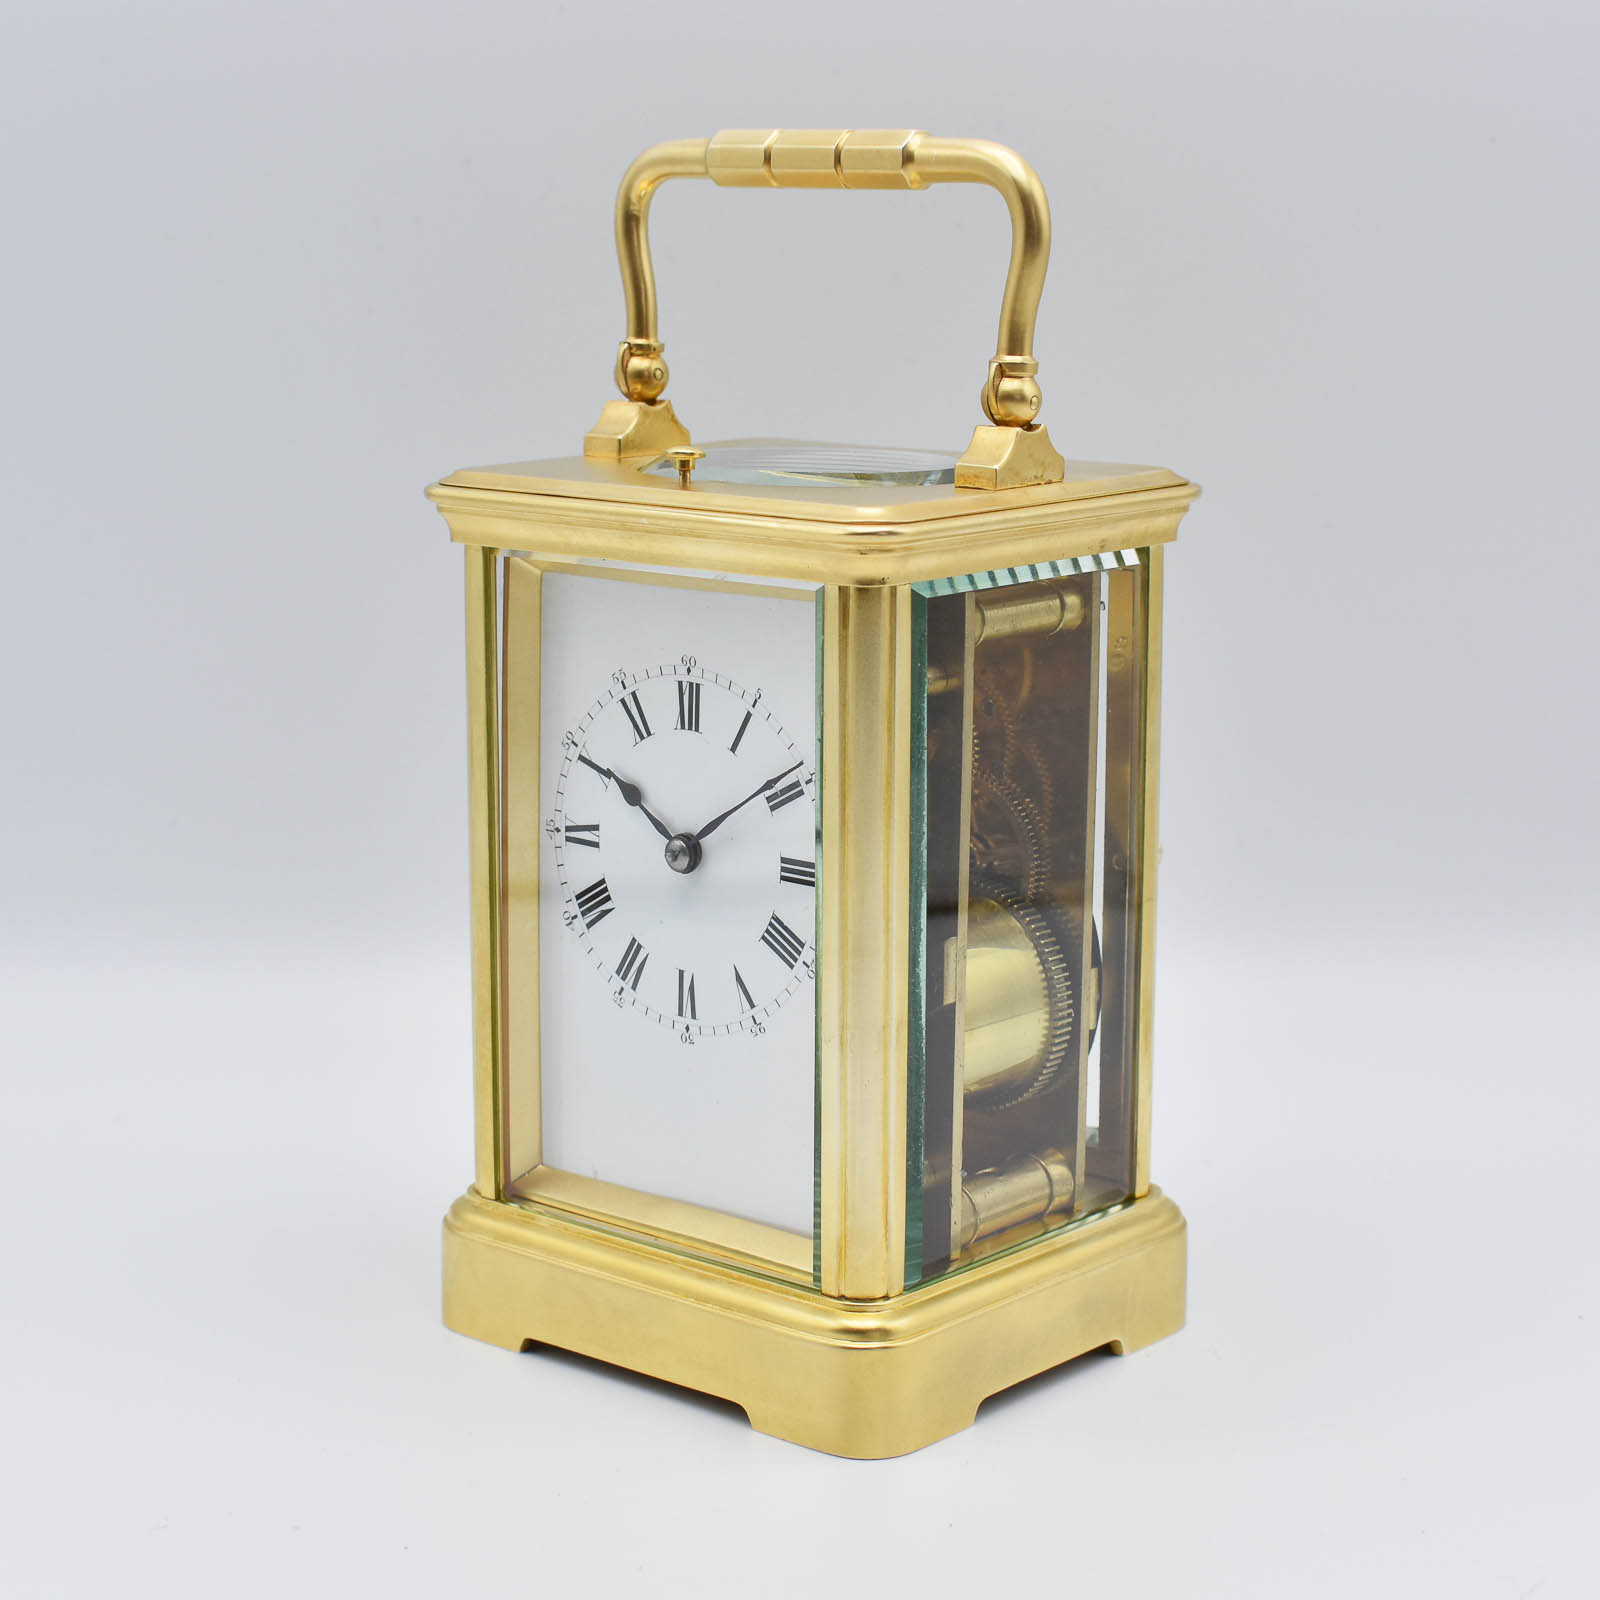 Carriage Clock – It's About Time